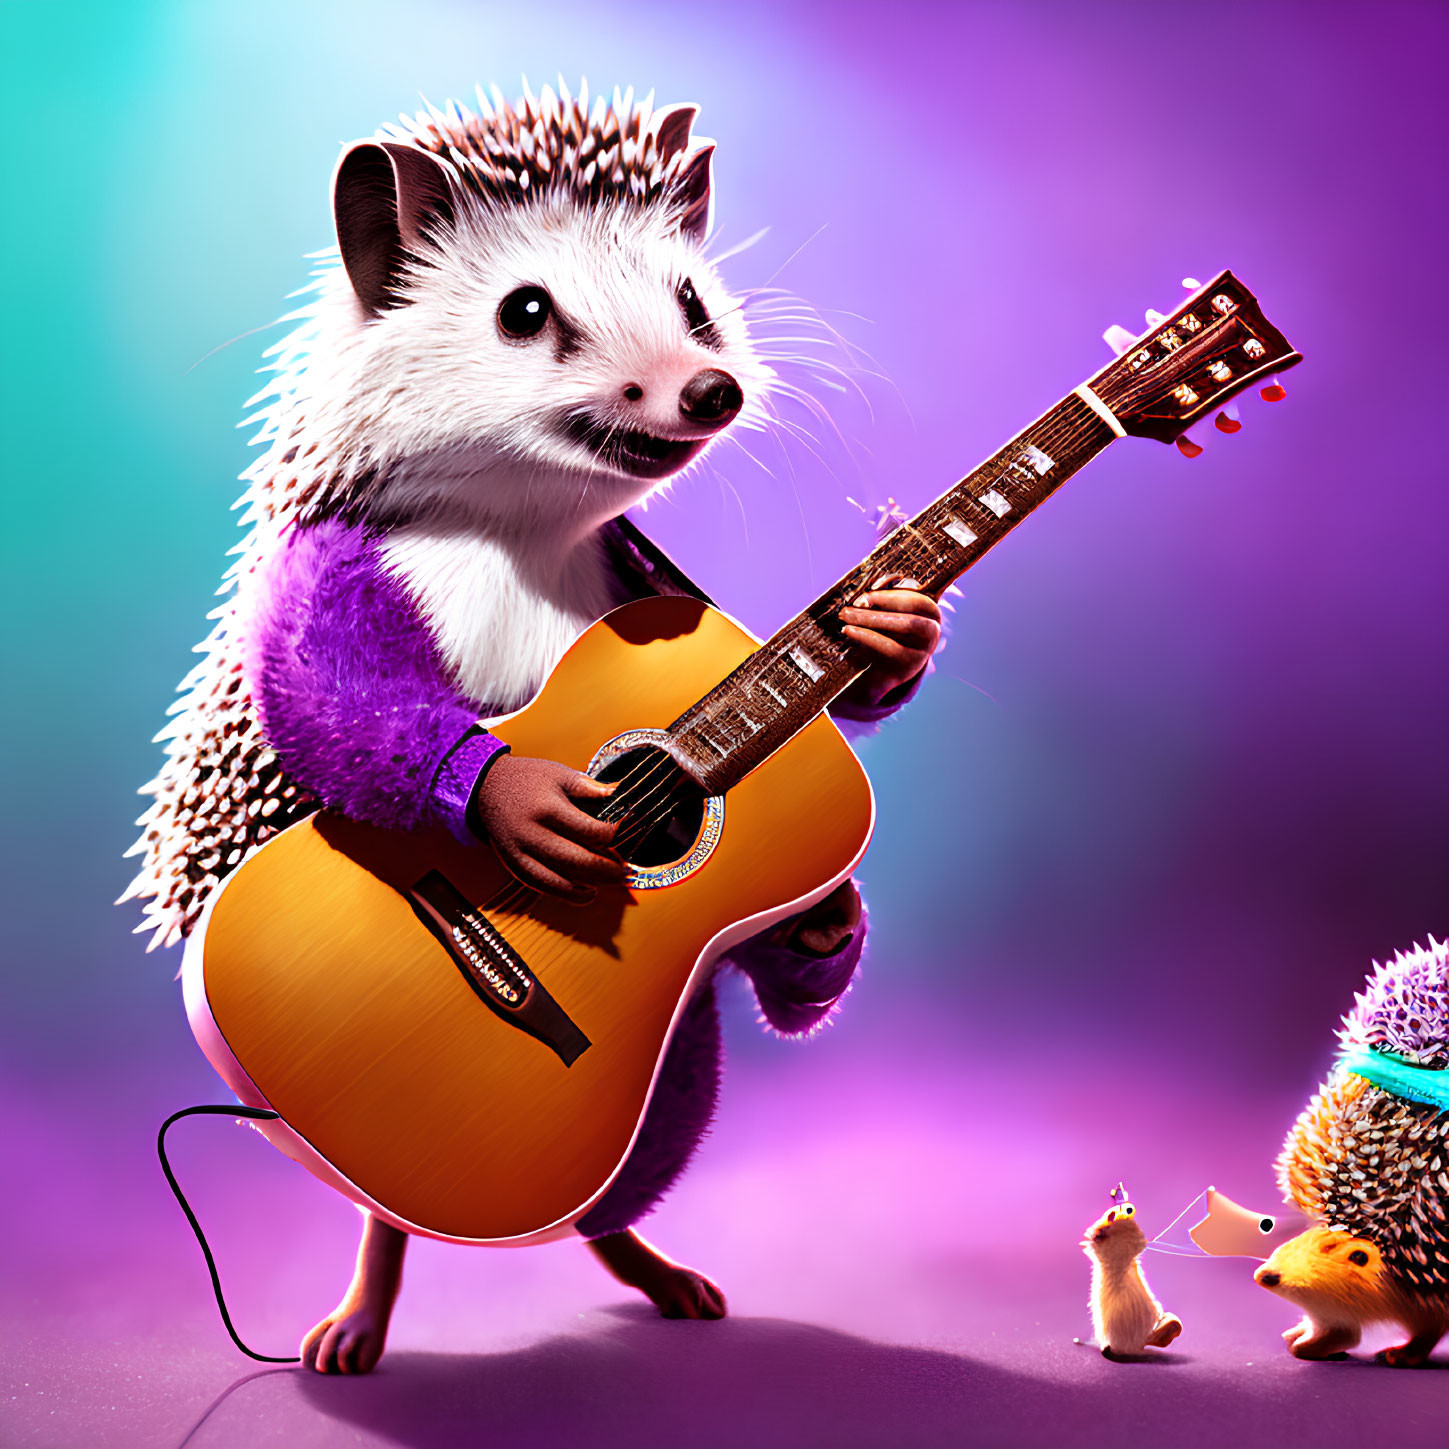 Anthropomorphic hedgehog playing guitar on purple-lit stage with tiny fans